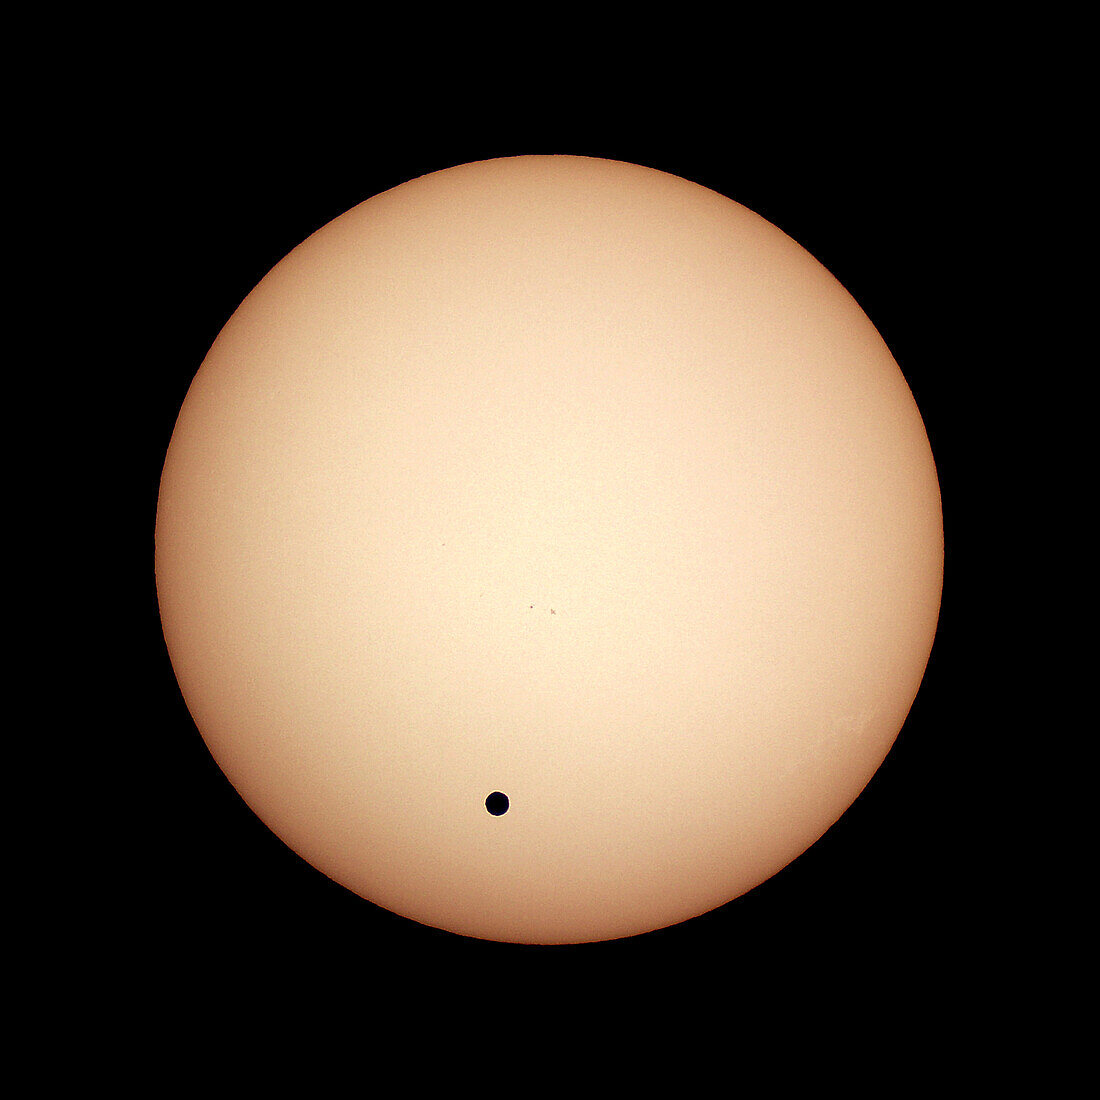 Transit of Venus, June 8, 2004, from Luxor, Egypt. A single image taken near mid-transit. Taken with a Sony DSC-V1 digital camera shooting afocally through a 40mm eyepiece and on a 90mm apochromatic refractor, equatorially mounted and driven. Shot thru a Baader solar filter, which gives a white Sun. Yellow coloration added in Photoshop.